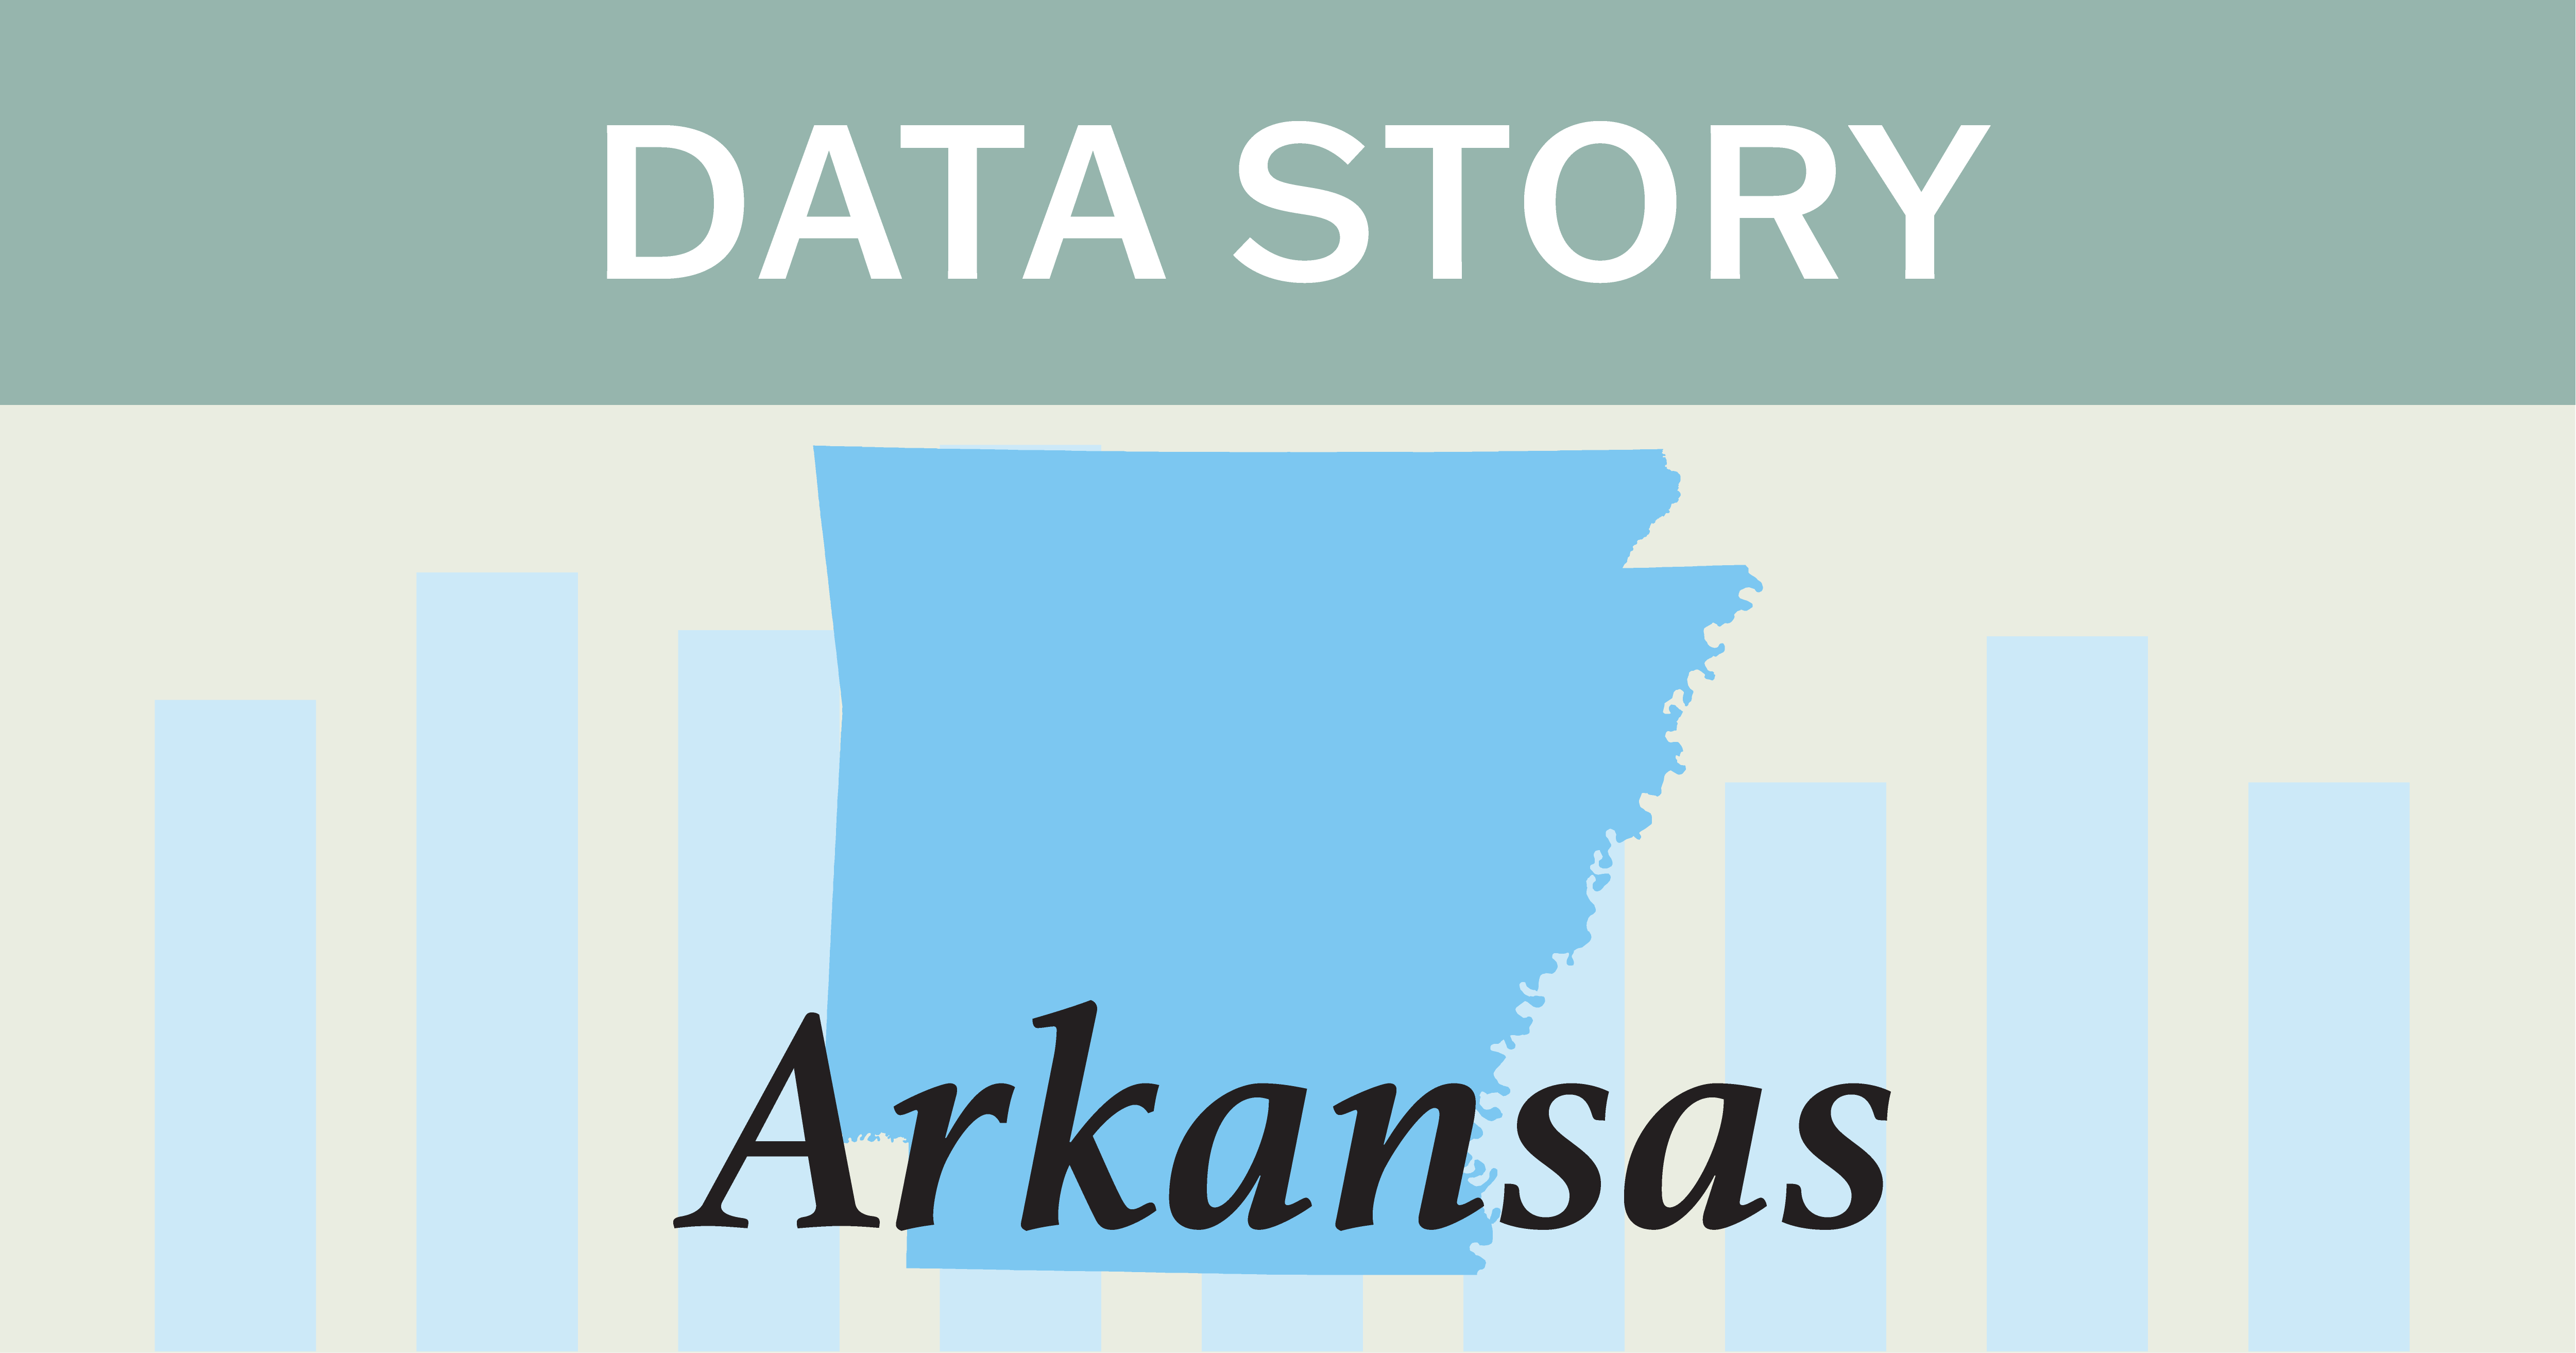 An outline of the state of Arkansas.